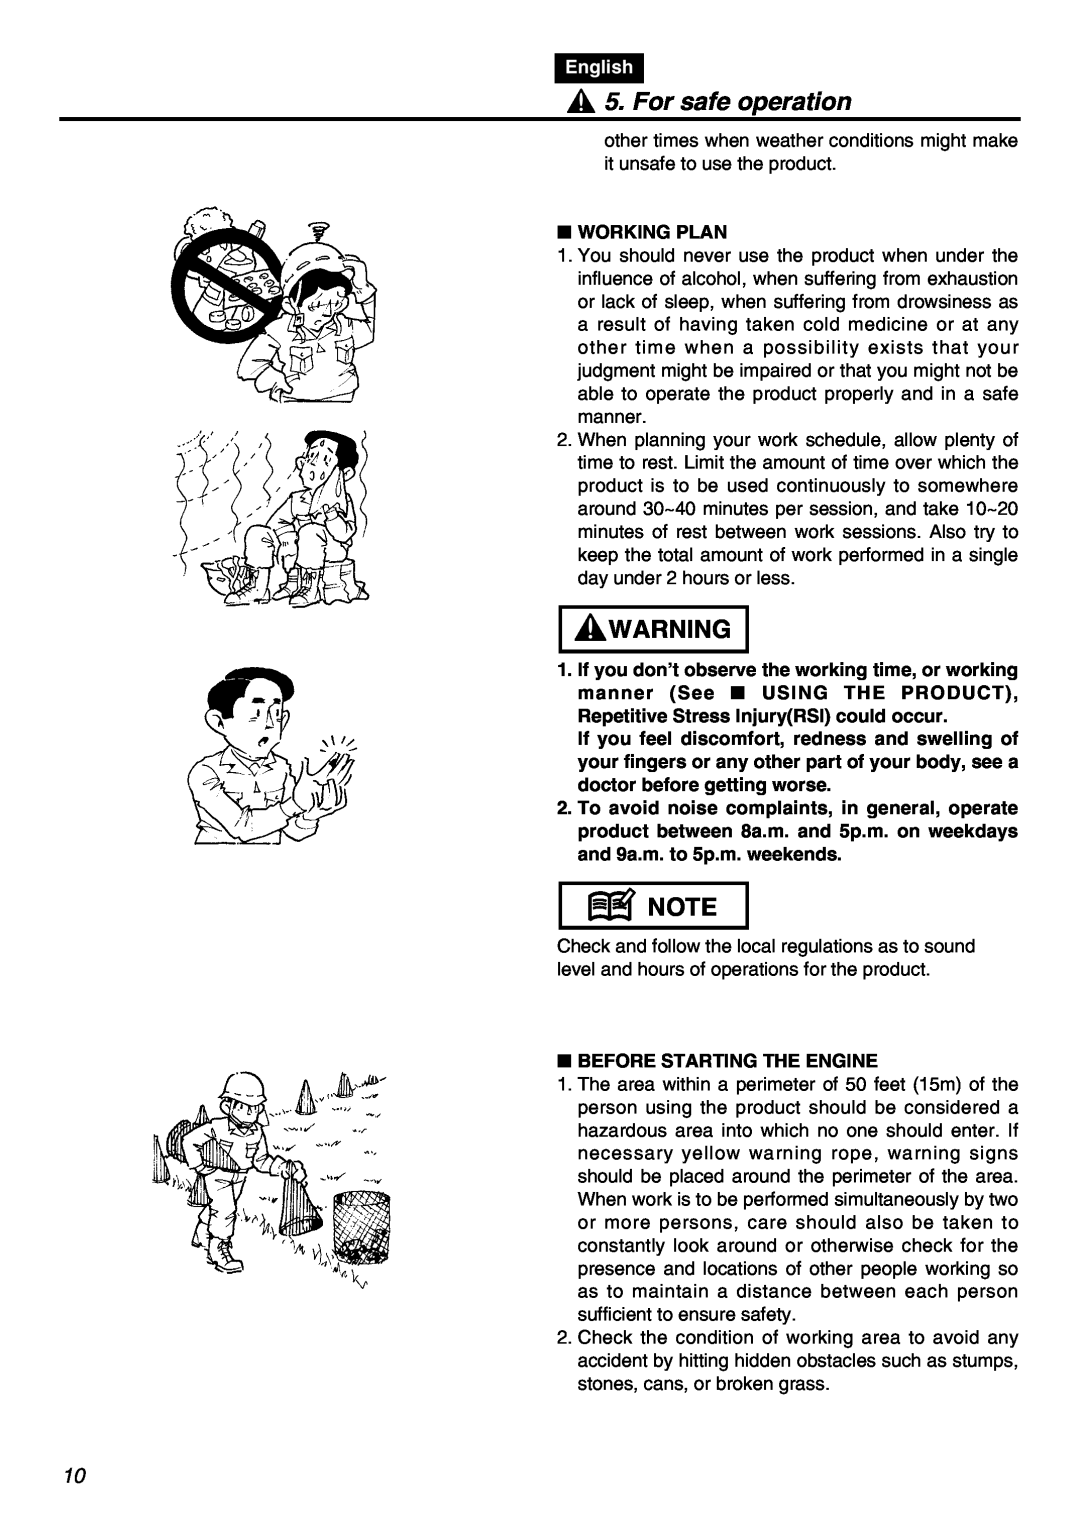 Zenoah HEZ2602S manual For safe operation, English, Working Plan, Repetitive Stress InjuryRSI could occur 